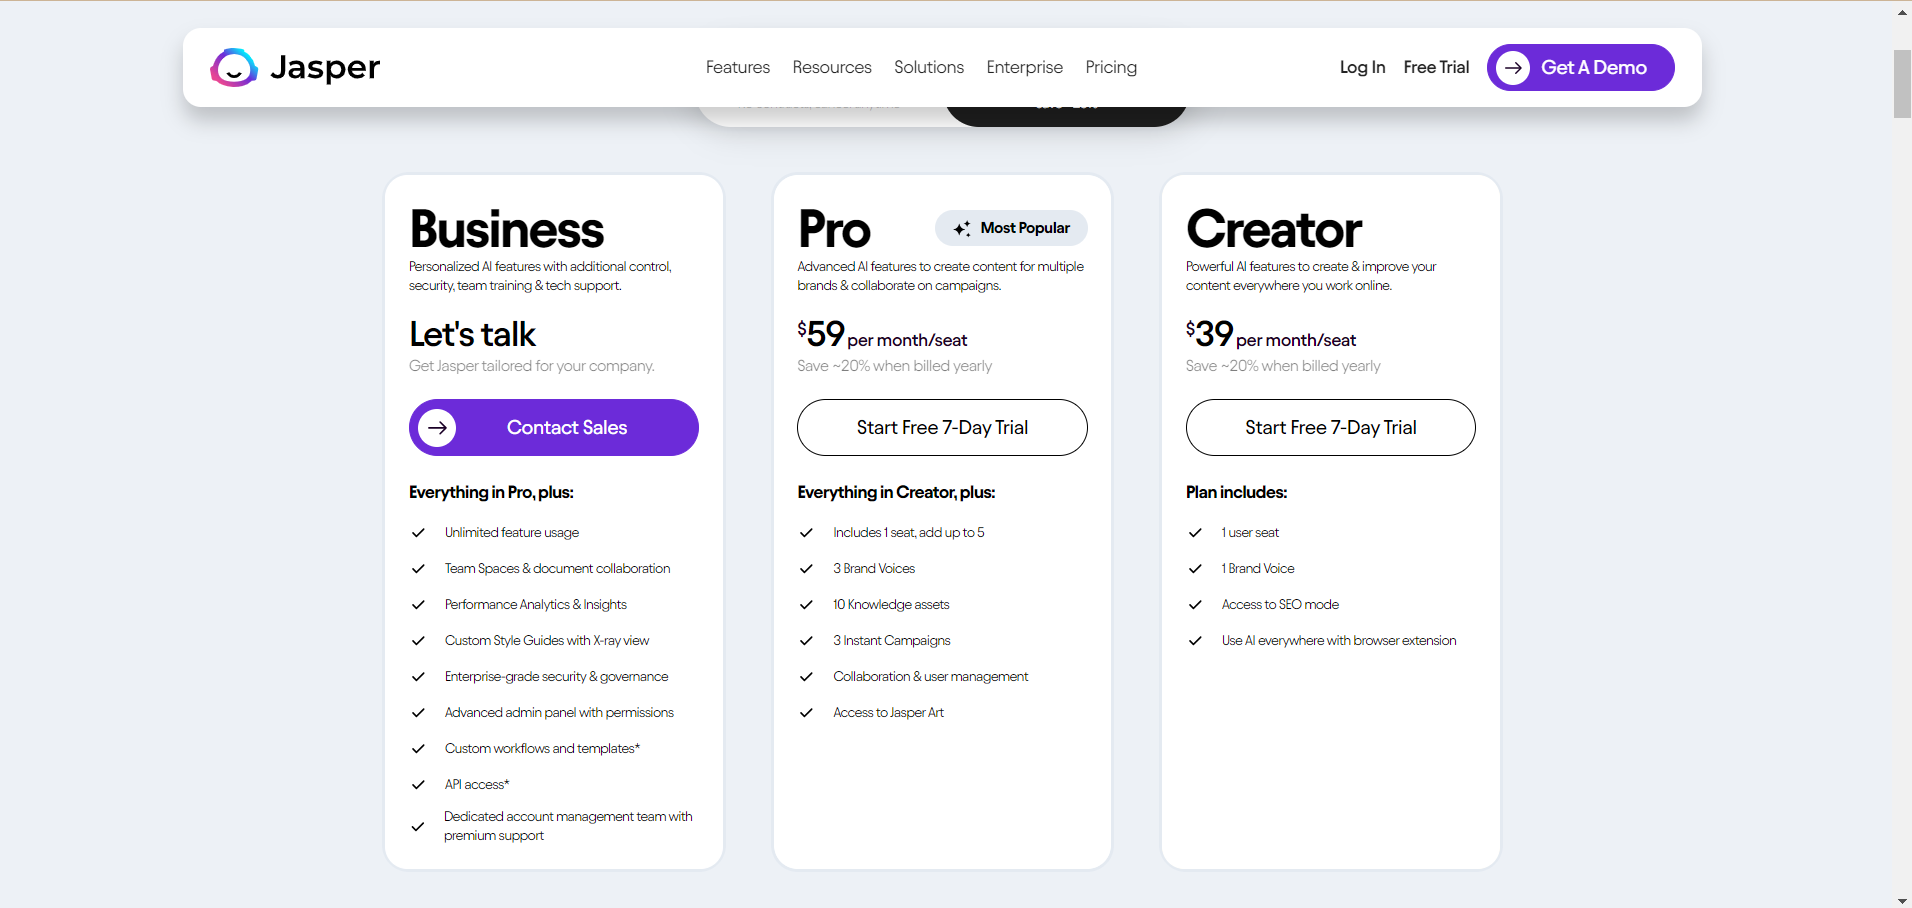 Jasper-AI-offers-tiered-pricing-starting-at-$49/month-for-individuals-to-$125/month-for-teams-with-custom-options-for-businesses.-While-not-the-cheapest-its-feature-rich-plans-prioritize-quality-and-efficiency-in-content-creation-with-potential-additional-costs-like-overage-fees-or-optional-services-to-consider.